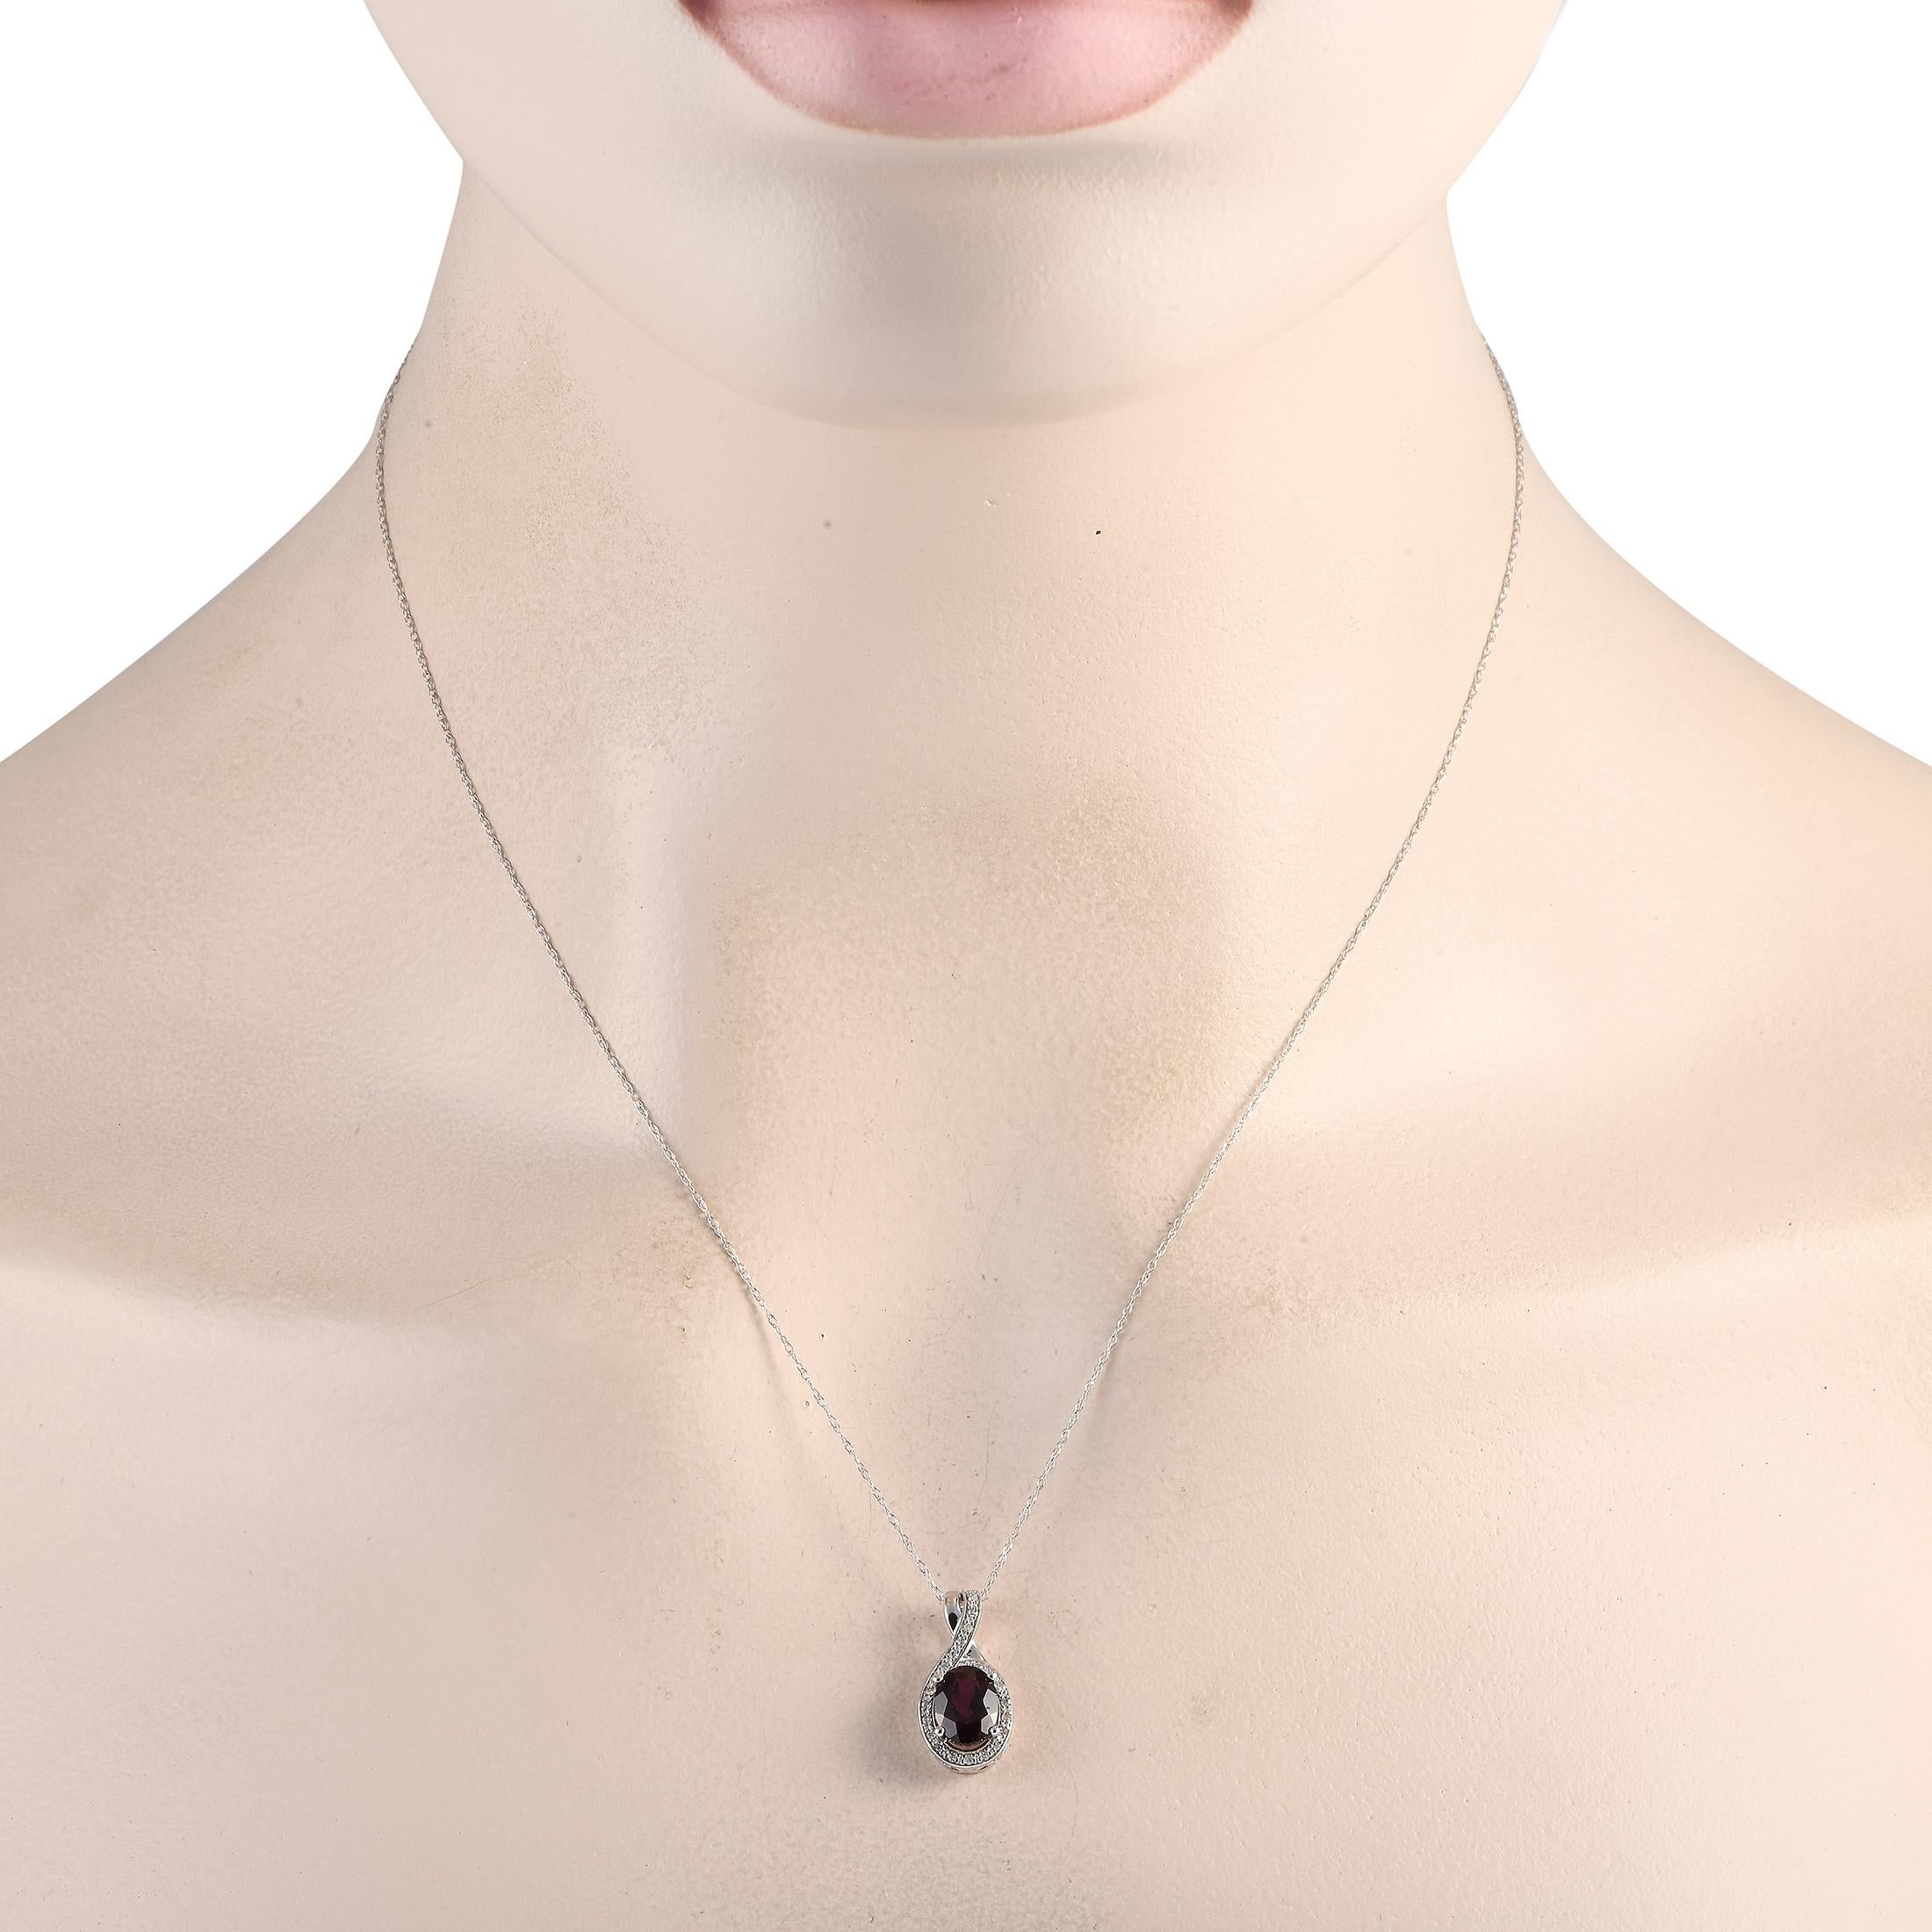 At the center of this necklaces elegant 14K White Gold pendant, a captivating Garnet center stone shines to life thanks to additional Diamond accents totaling 0.11 carats. The pendant measures 0.75 long by 0.45 wide and is suspended from an 18